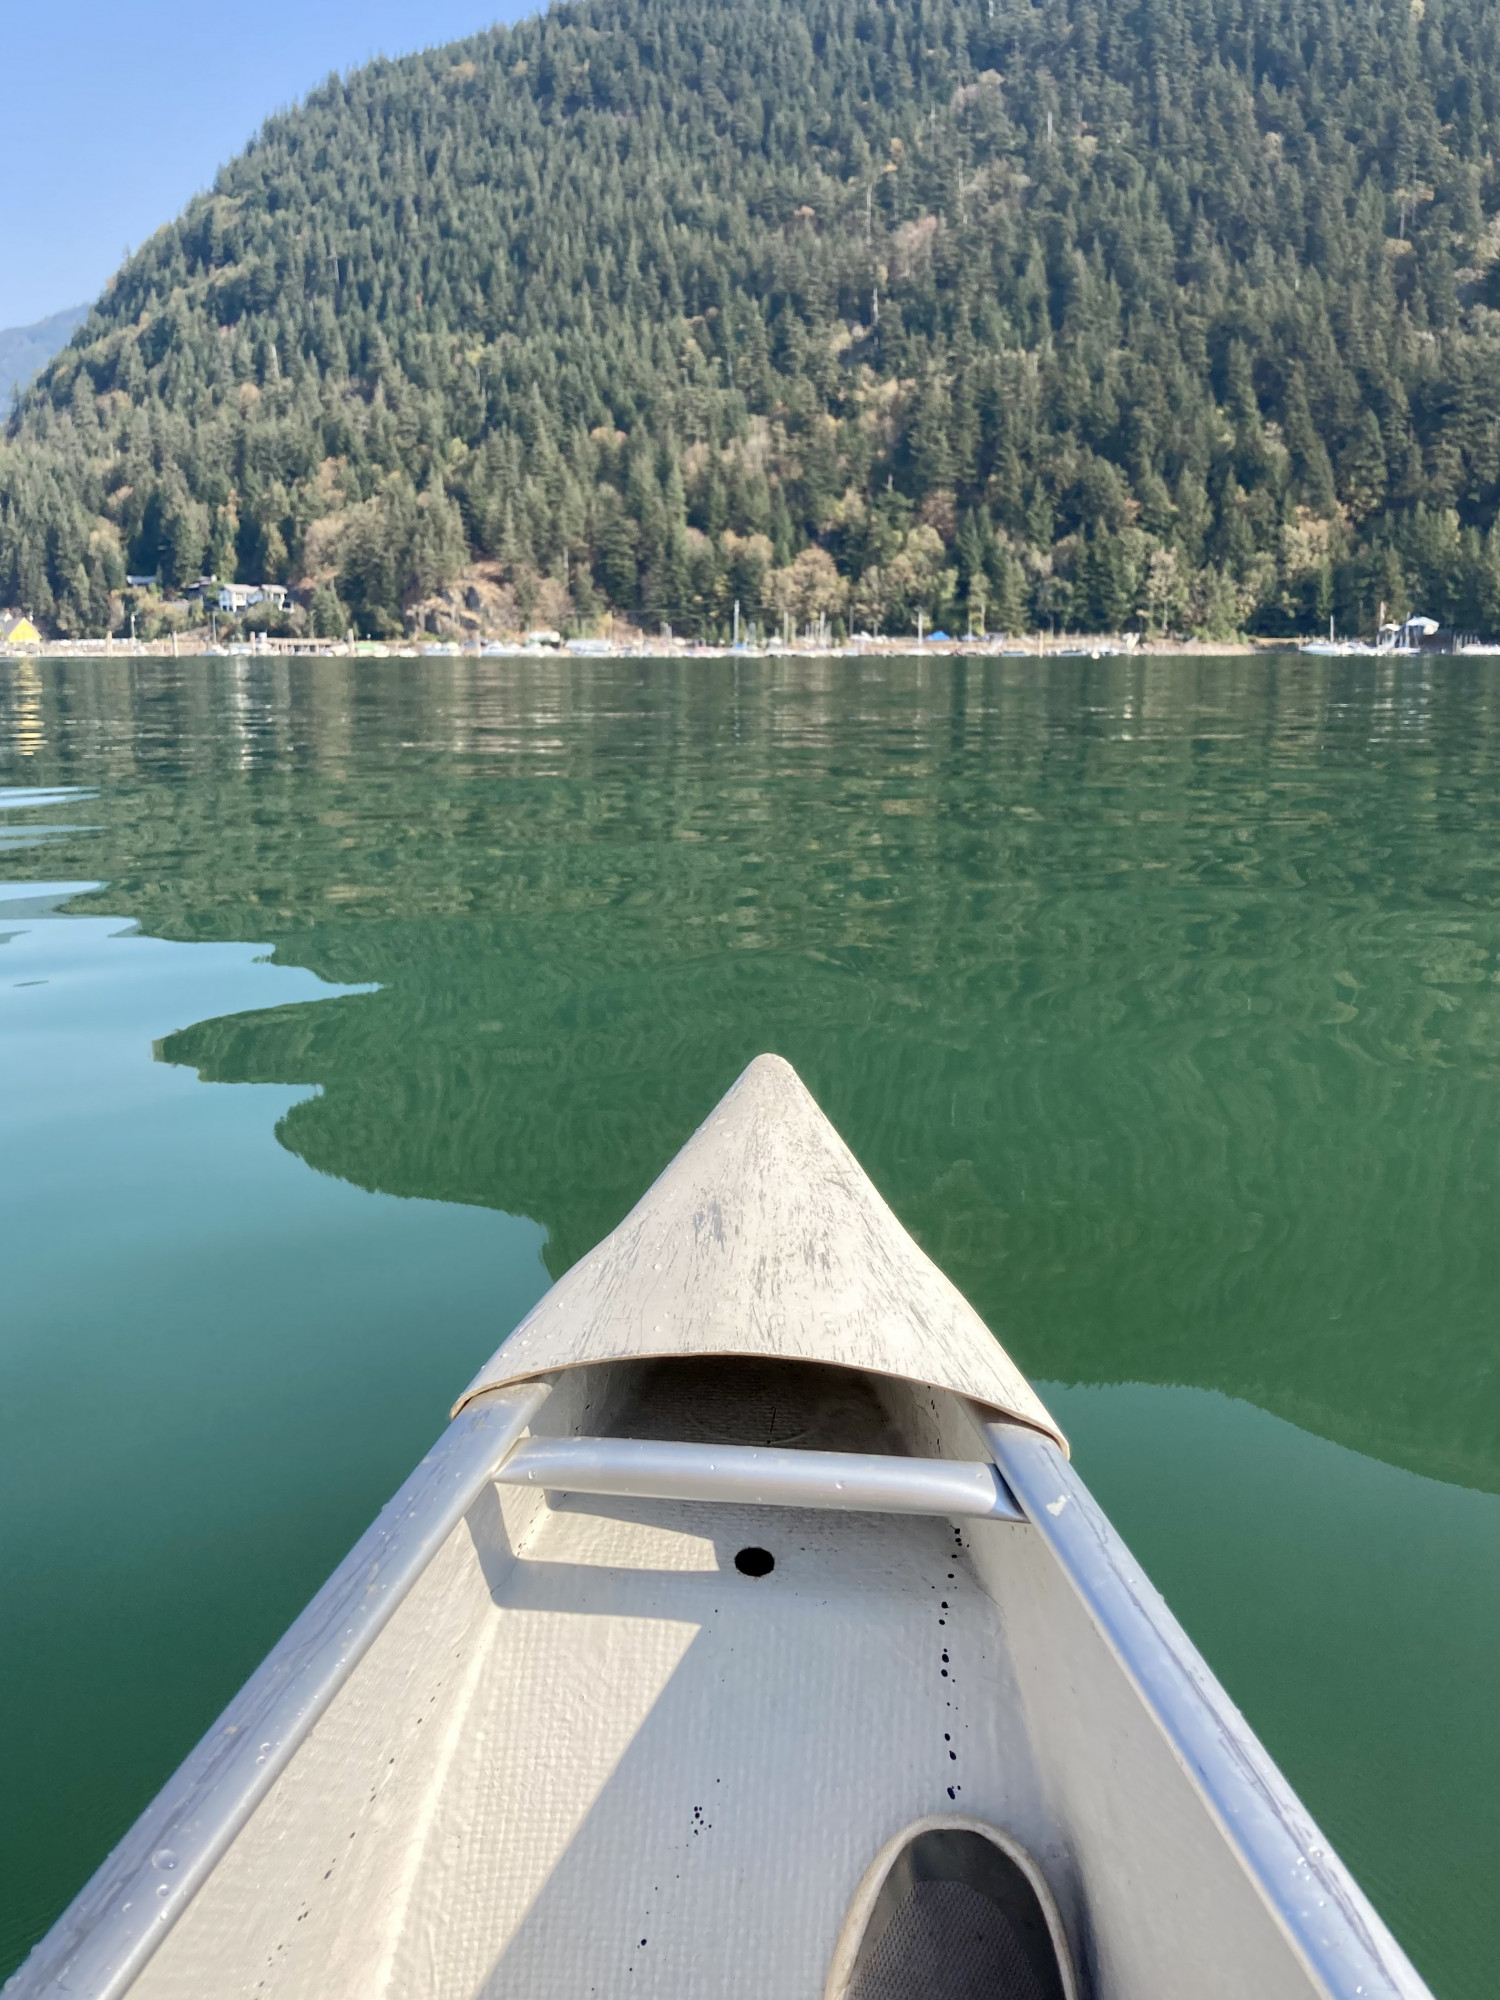 The view of an emerald-green lake from the front of a white canoe, with forested mountains past the distant shore